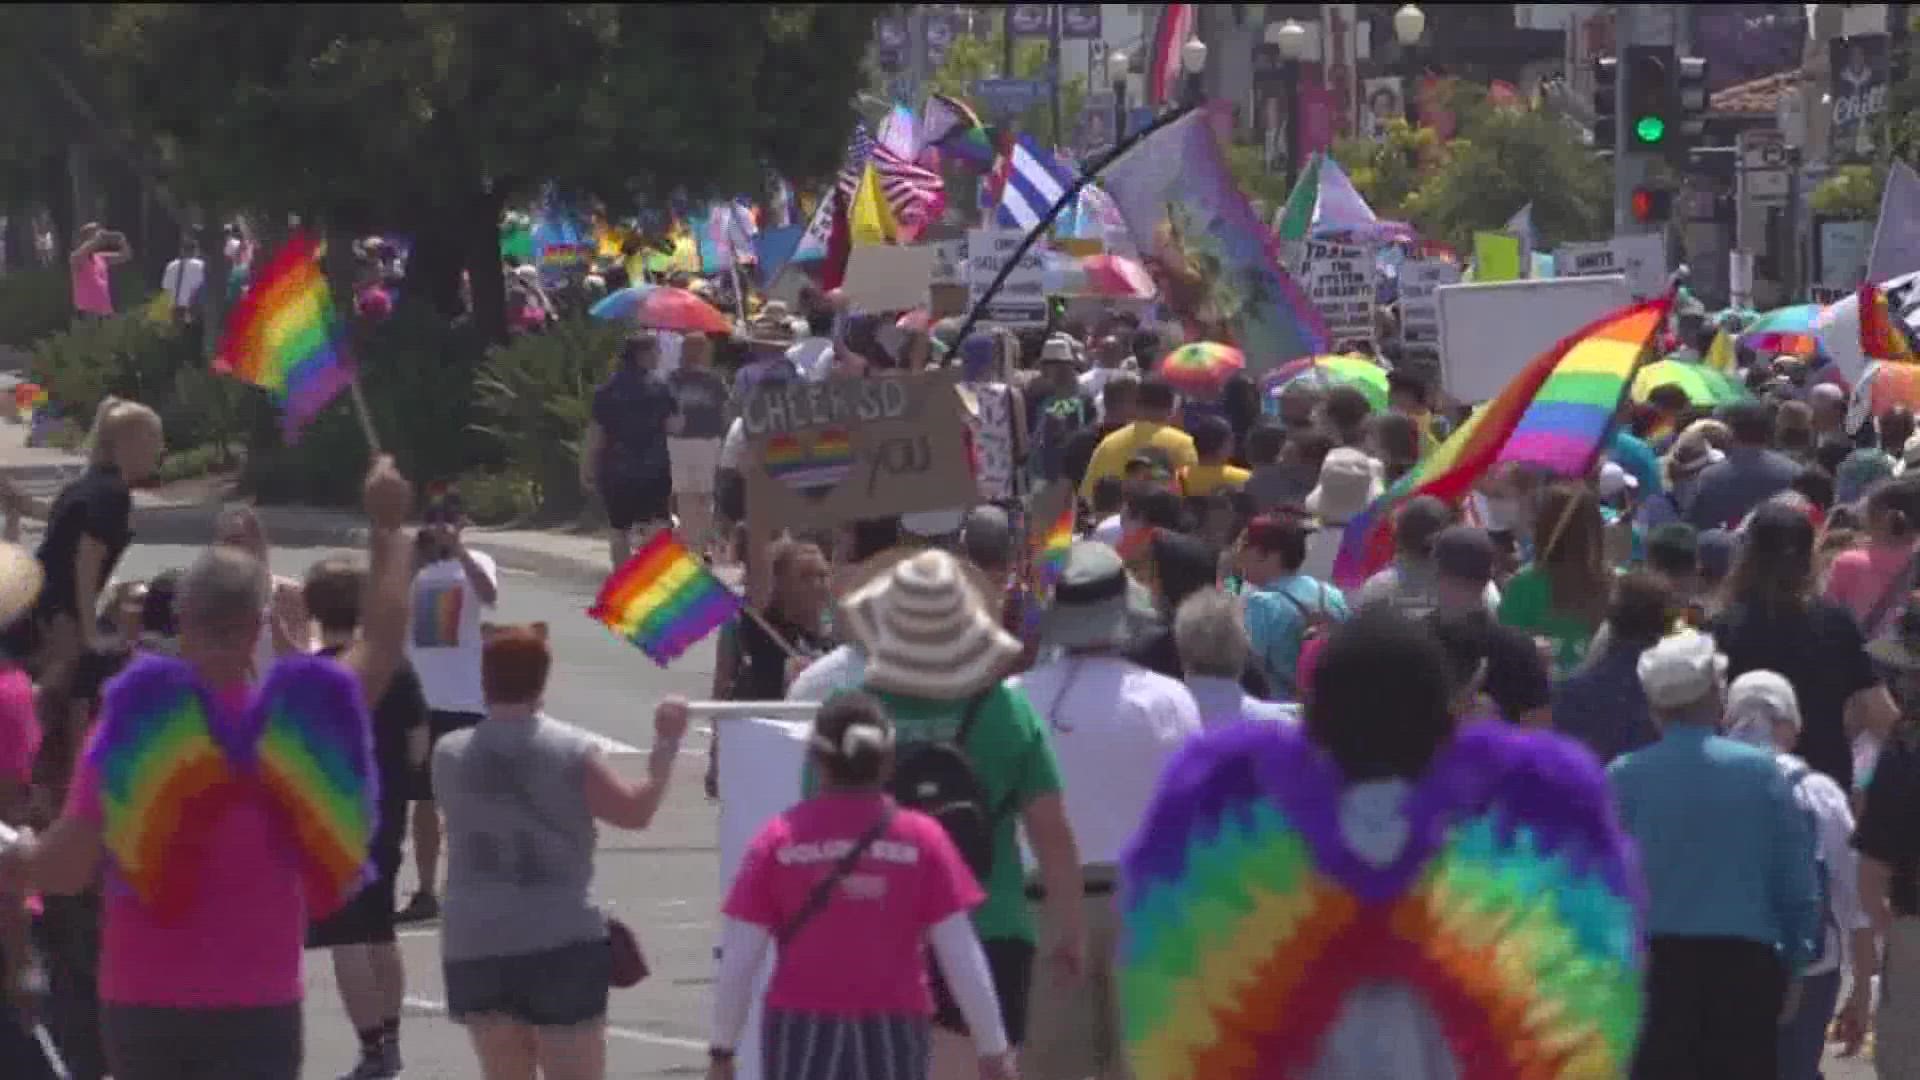 San Diego Pride 2018 brought in nearly $30 million in economic impact.